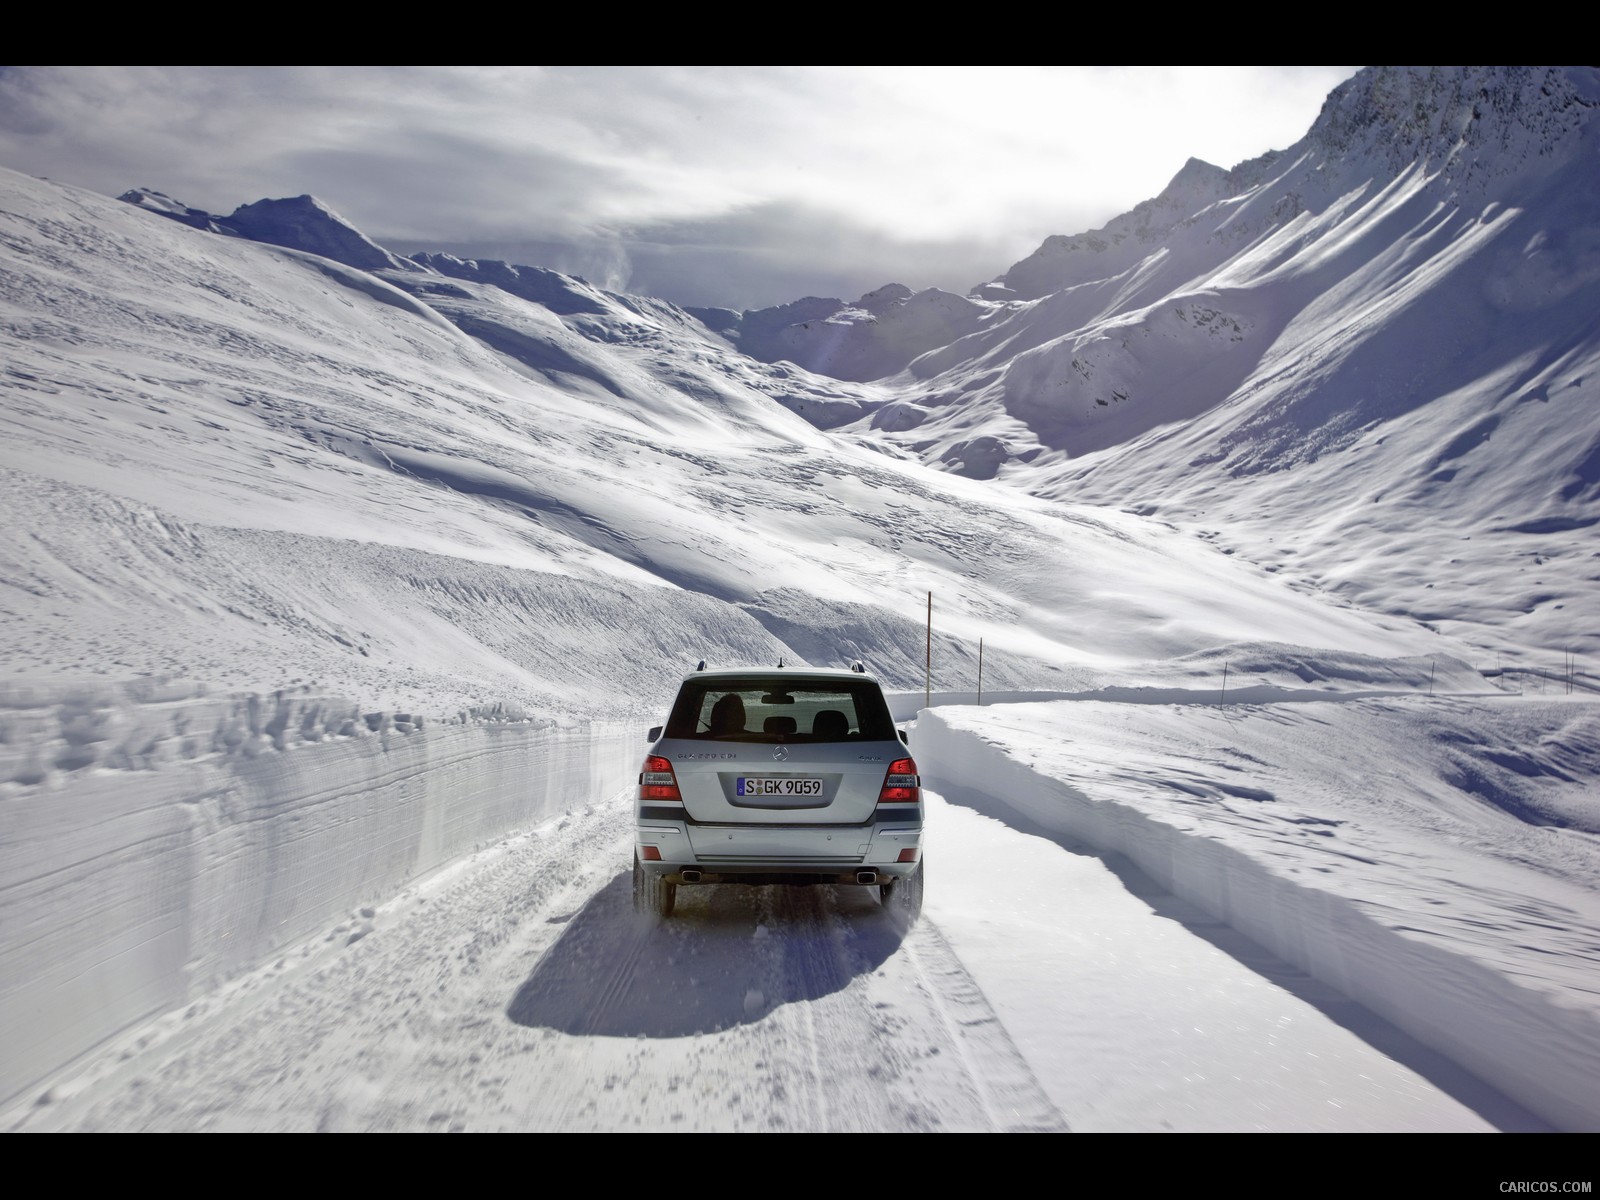 Mercedes-Benz GLK-Class - On Snow - Rear Angle , #39 of 351